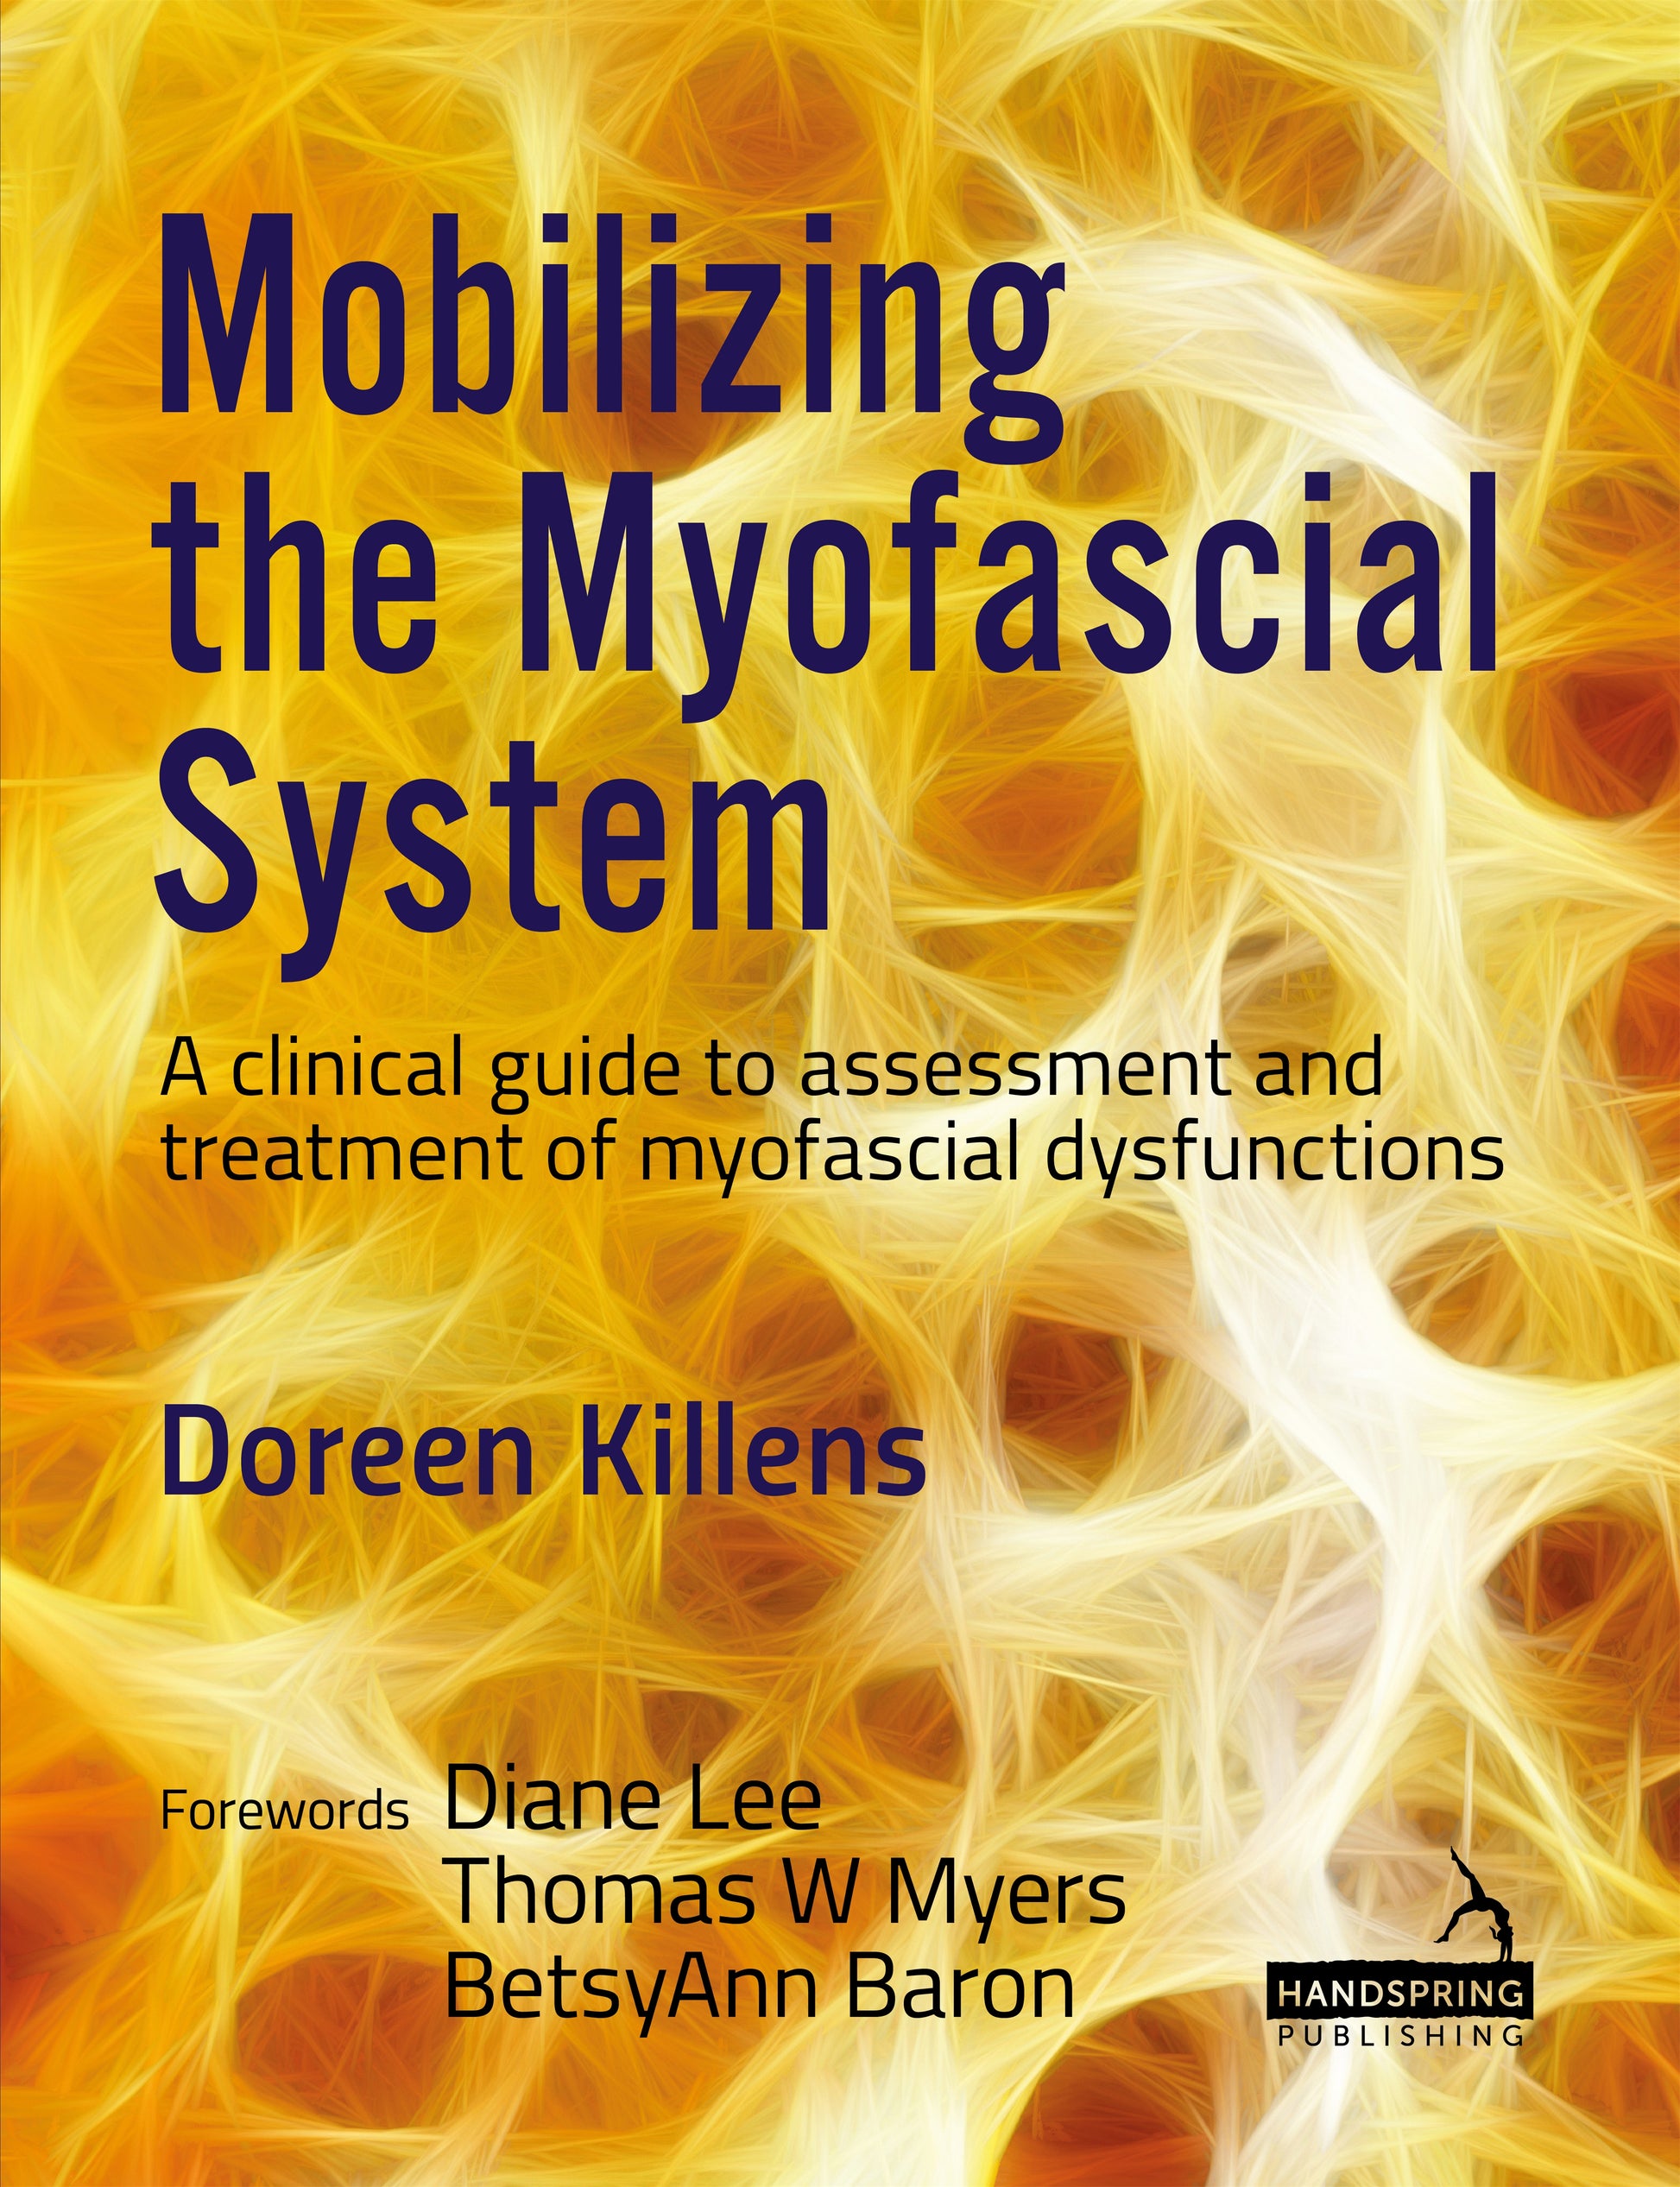 Mobilizing the Myofascial System by Doreen Killens